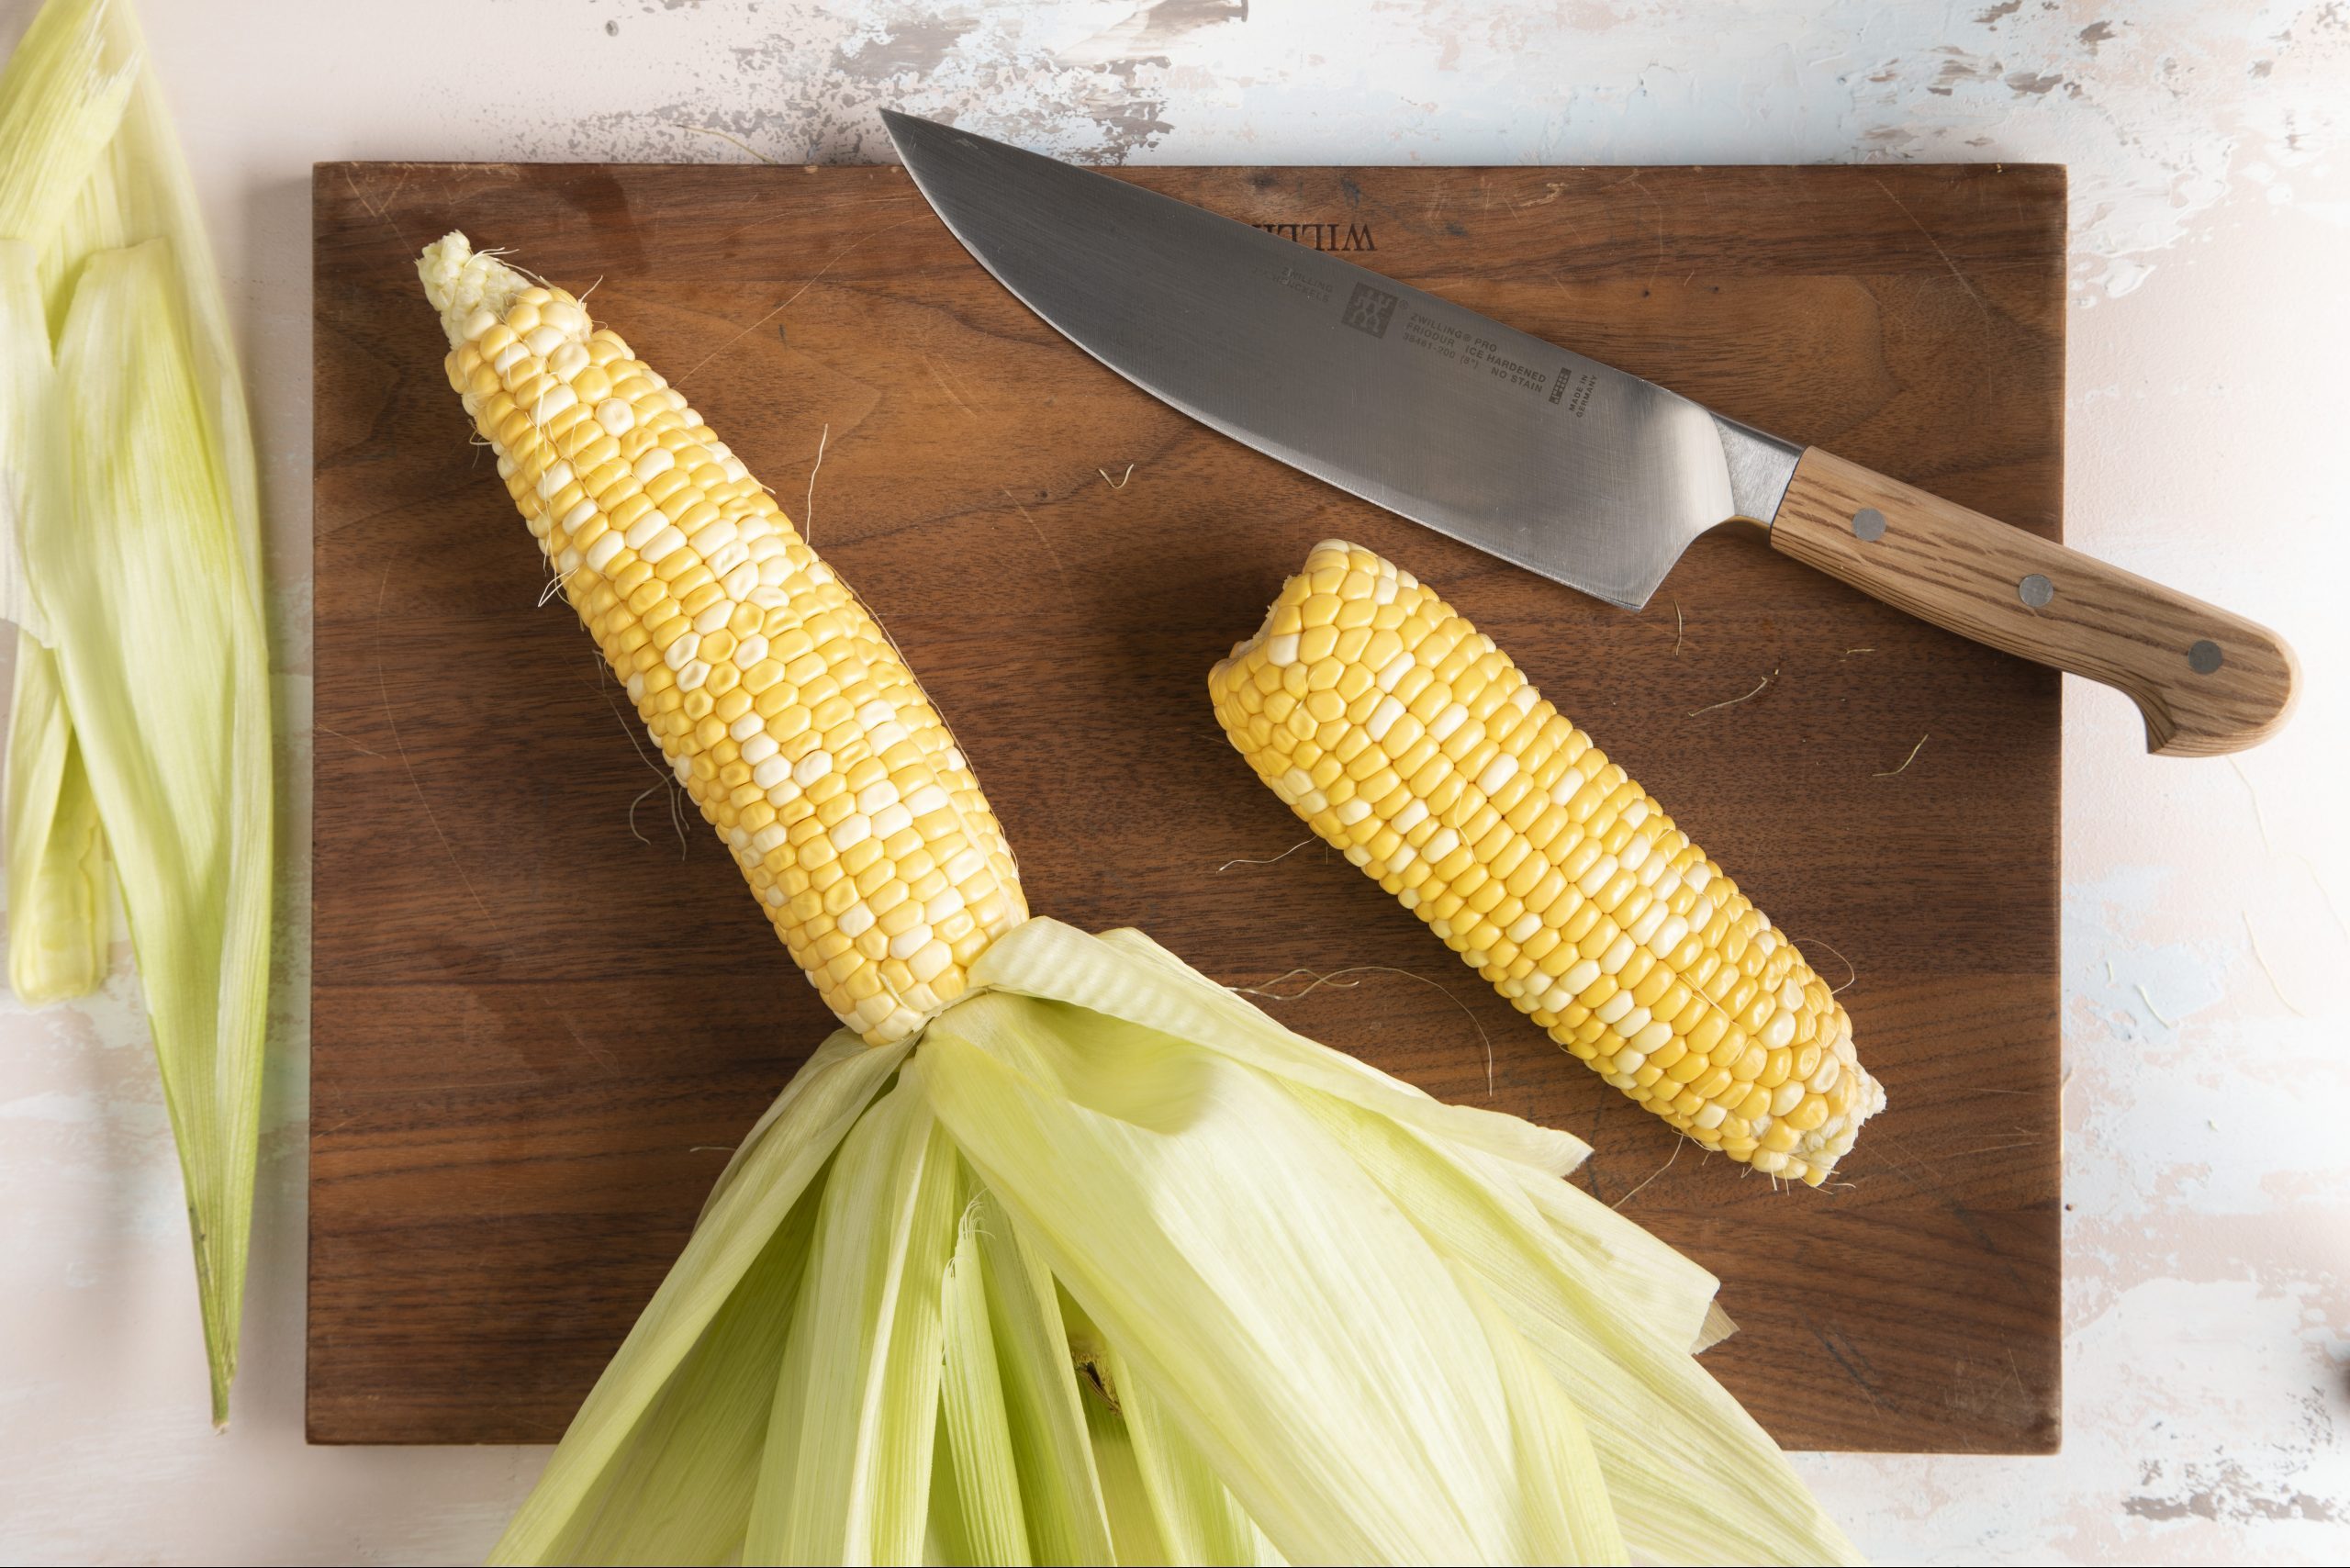  How to Boil Corn on the Cob Perfectly Every Time